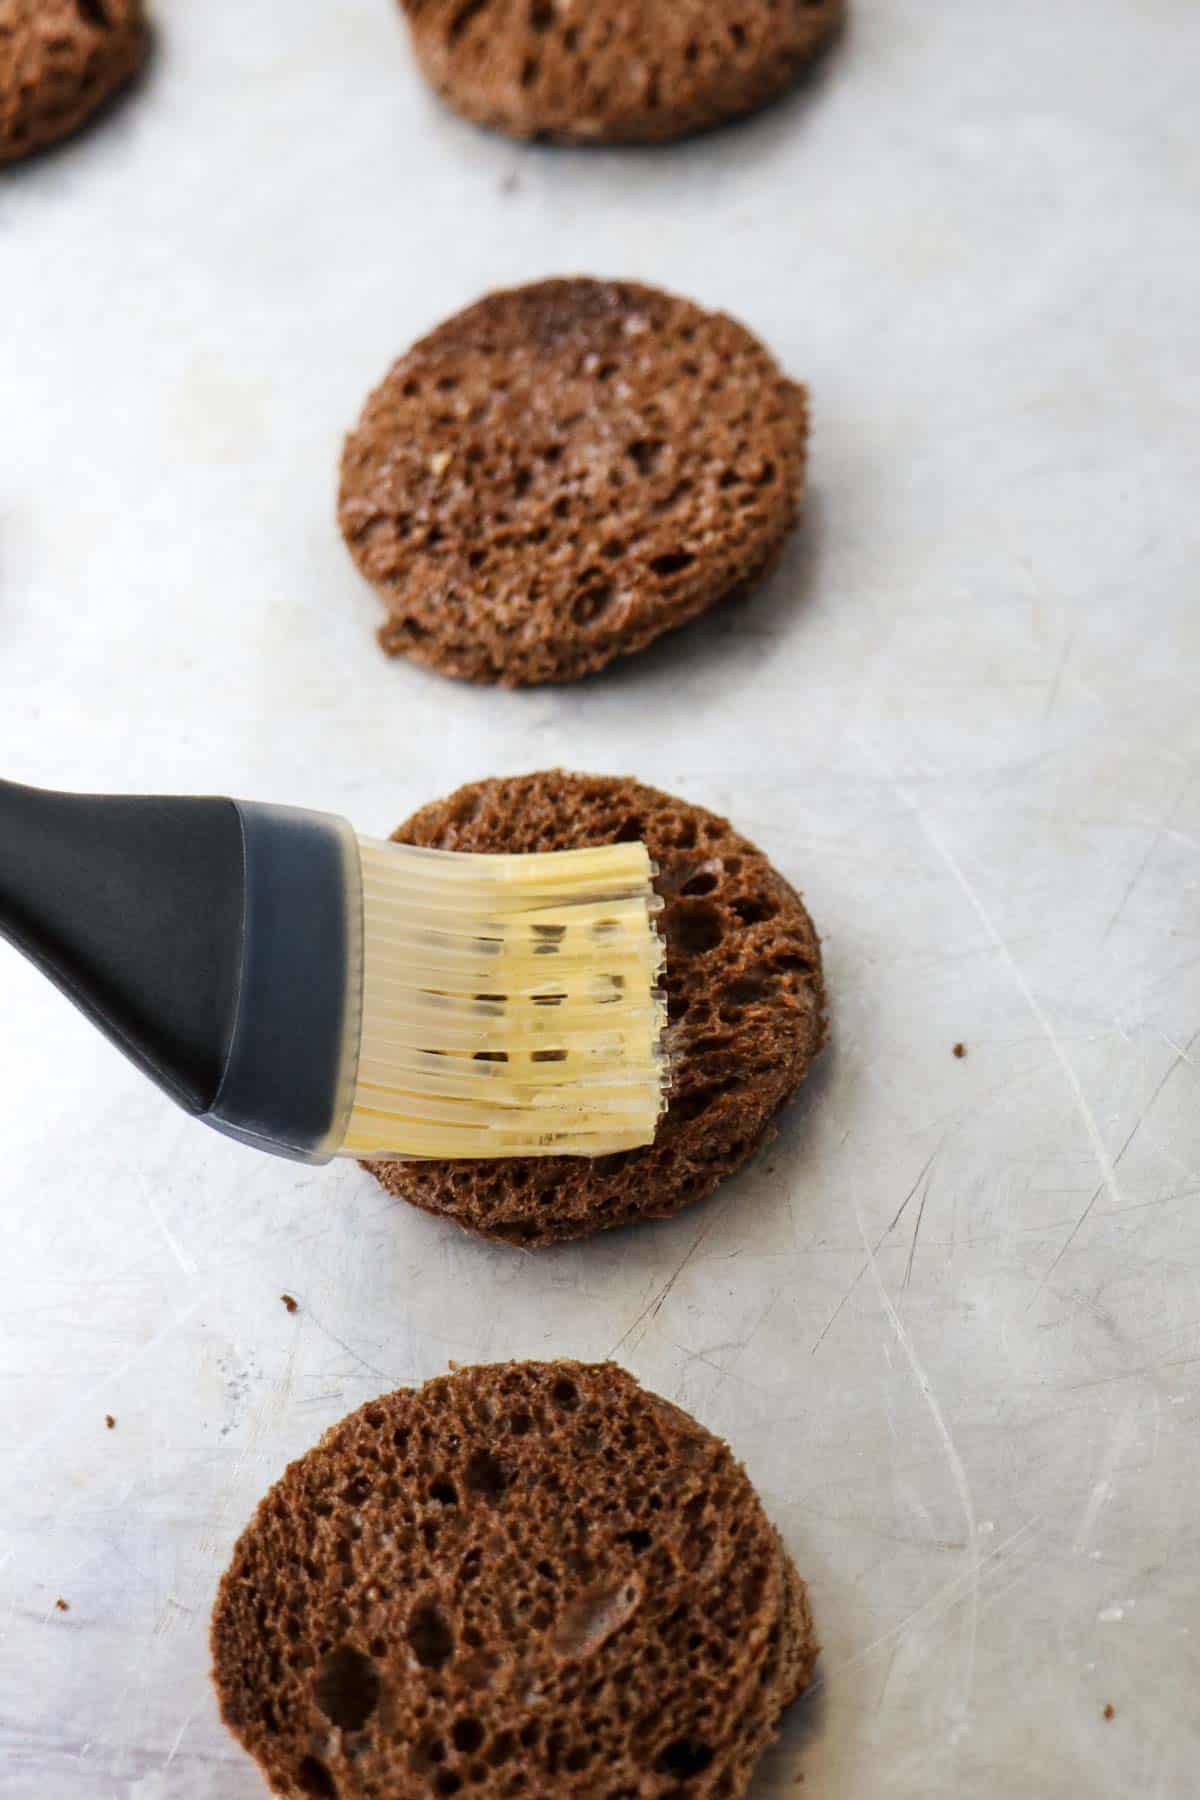 Brushing melted butter on rye bread rounds.